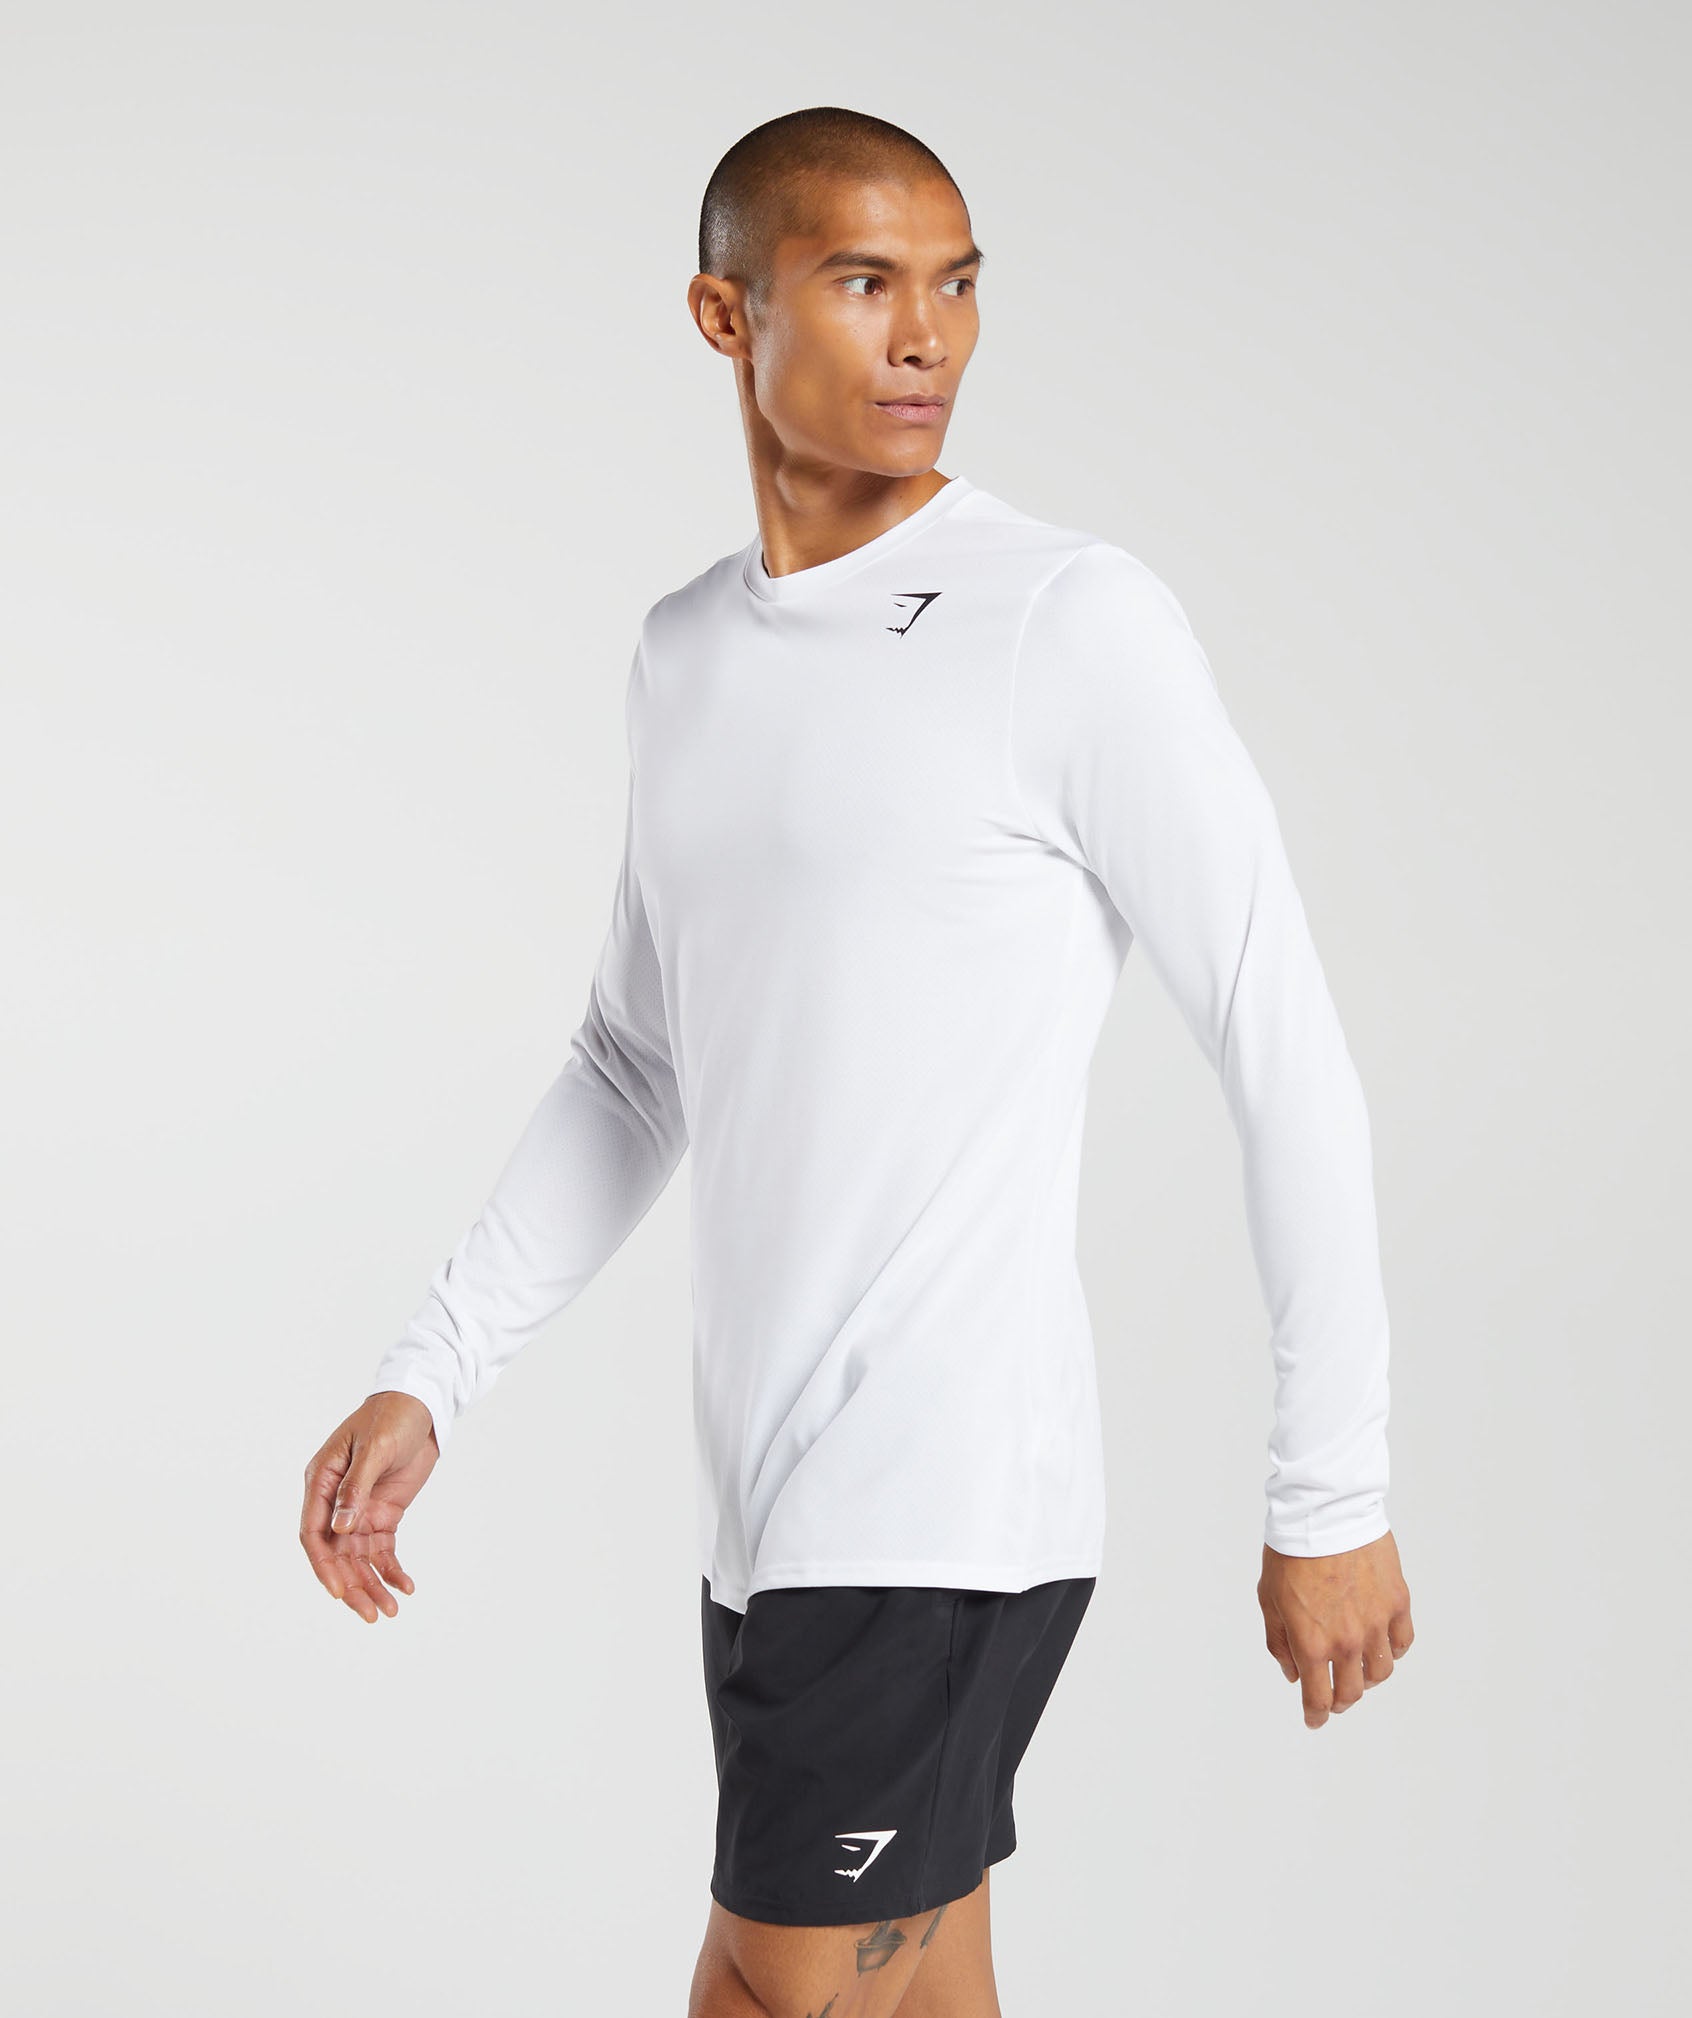 Arrival Long Sleeve T-Shirt in White - view 3